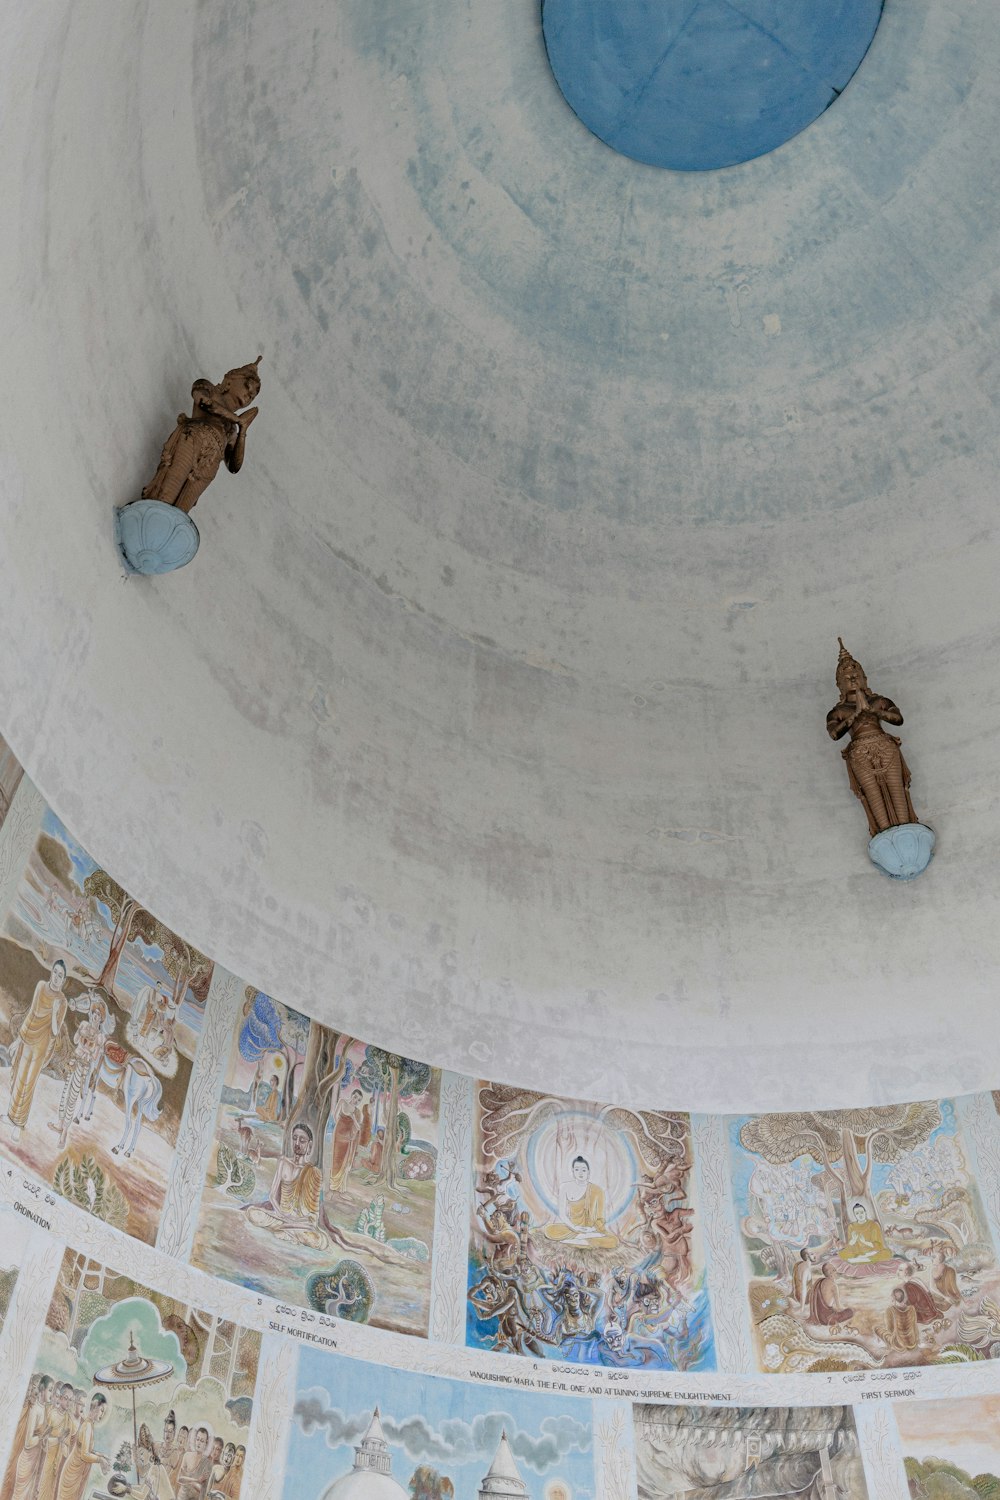 dome ceiling with figurines and paintings